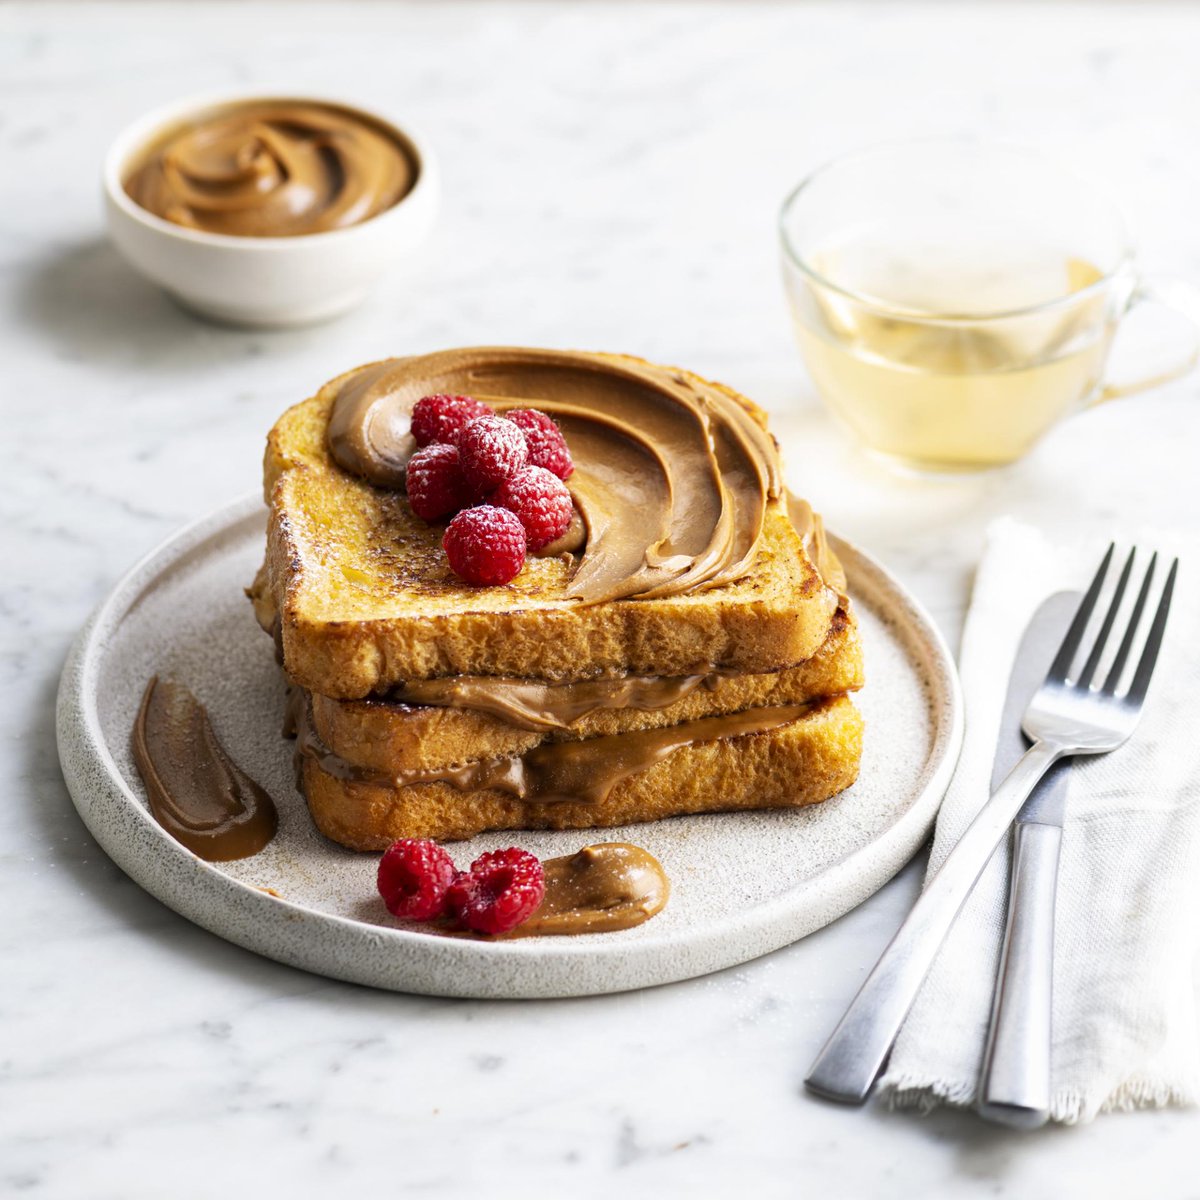 Happy Mother's Day to all those who celebrate 💕 We think that this Biscoff stacked french toast is the perfect breakfast for all the queens out there! Head to the link in our stories for the recipe.